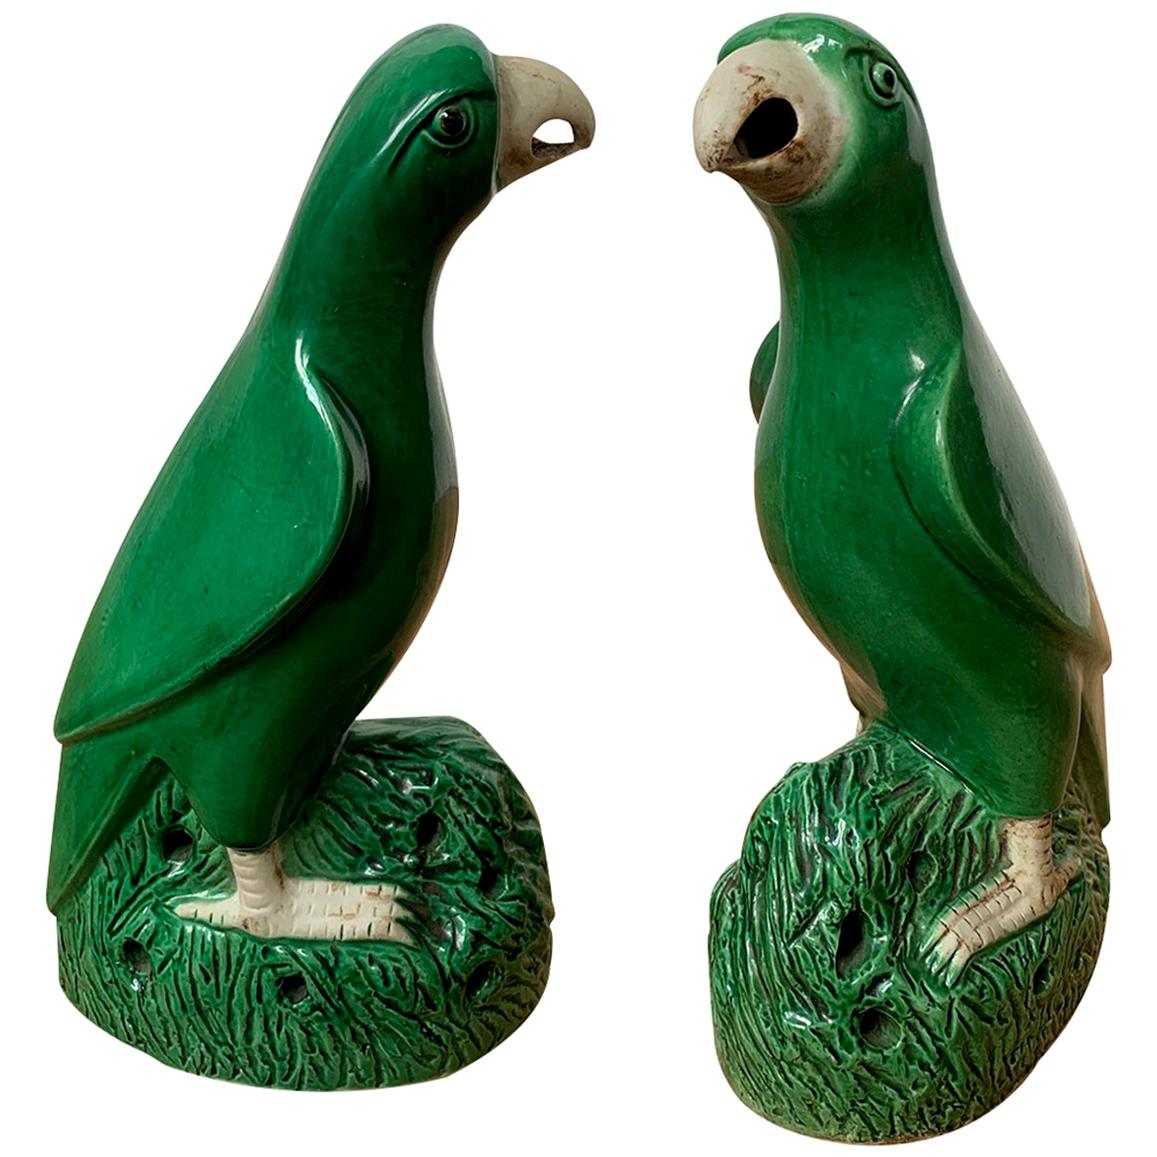 Pair of 19th Century Chinese Export Green Glazed Porcelain Parrots, Unmarked